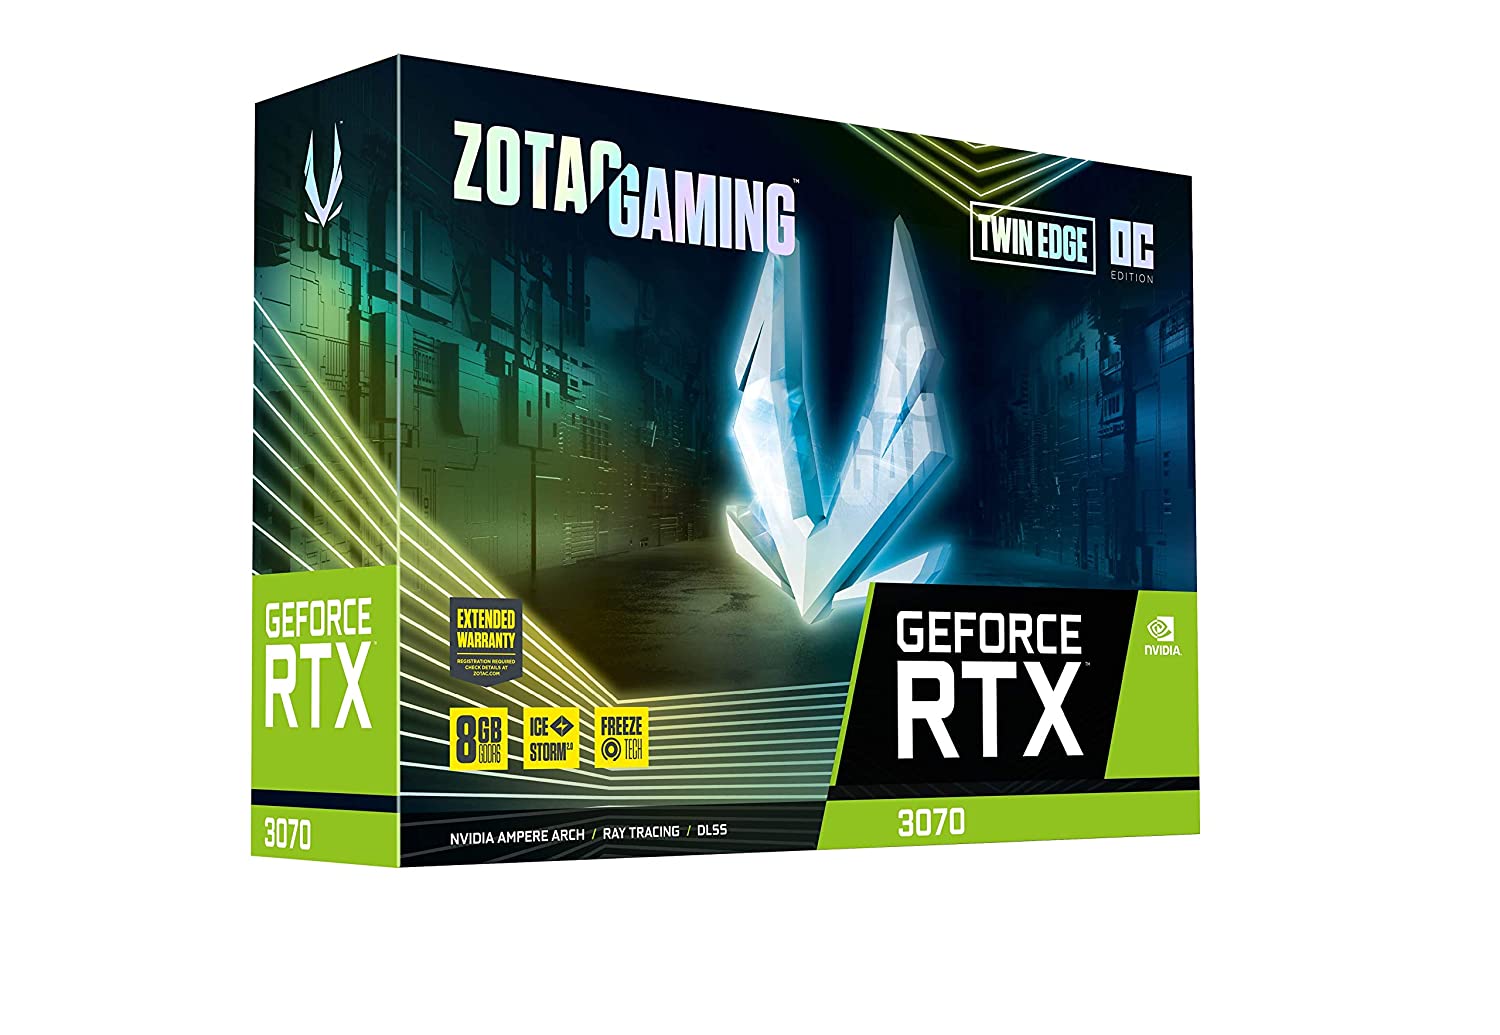 ZOTAC GAMING GeForce RTX 3070 Twin Edge OC 8GB GDDR6 256-bit 14 Gbps PCIE 4.0 Gaming Graphics Card, IceStorm 2.0 Advanced Cooling, White LED Logo Lighting, ZT-A30700H-10P-GRAPHICS CARD-dealsplant